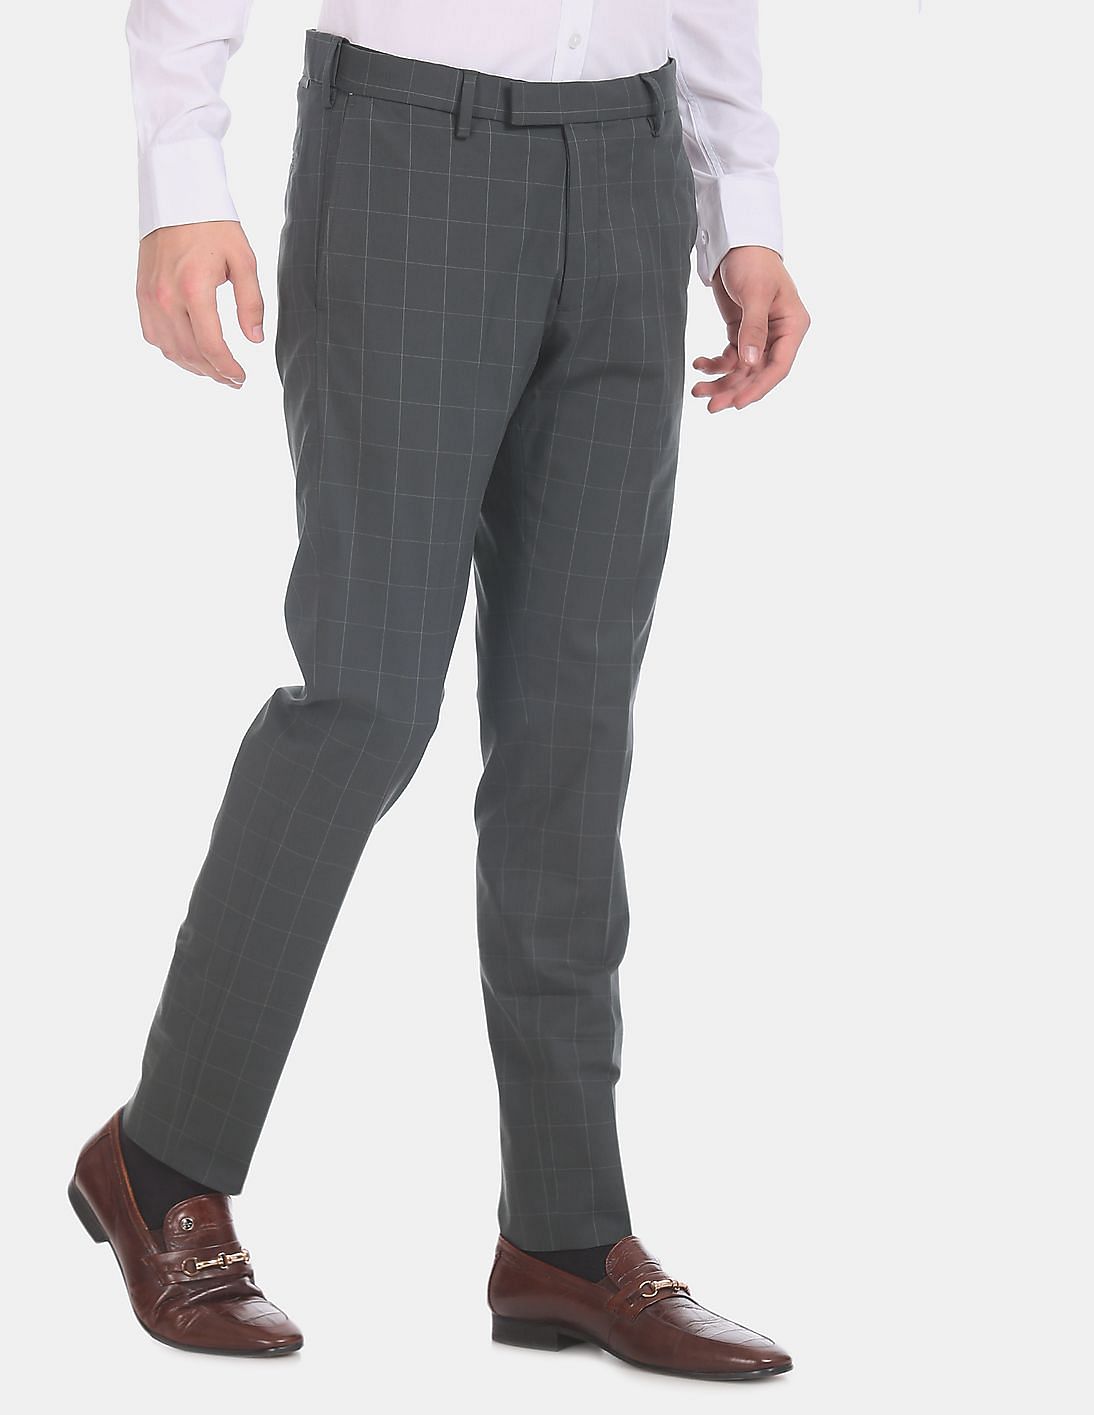 Buy USPA Tailored Men Grey Slim Fit Check Formal Trousers - NNNOW.com